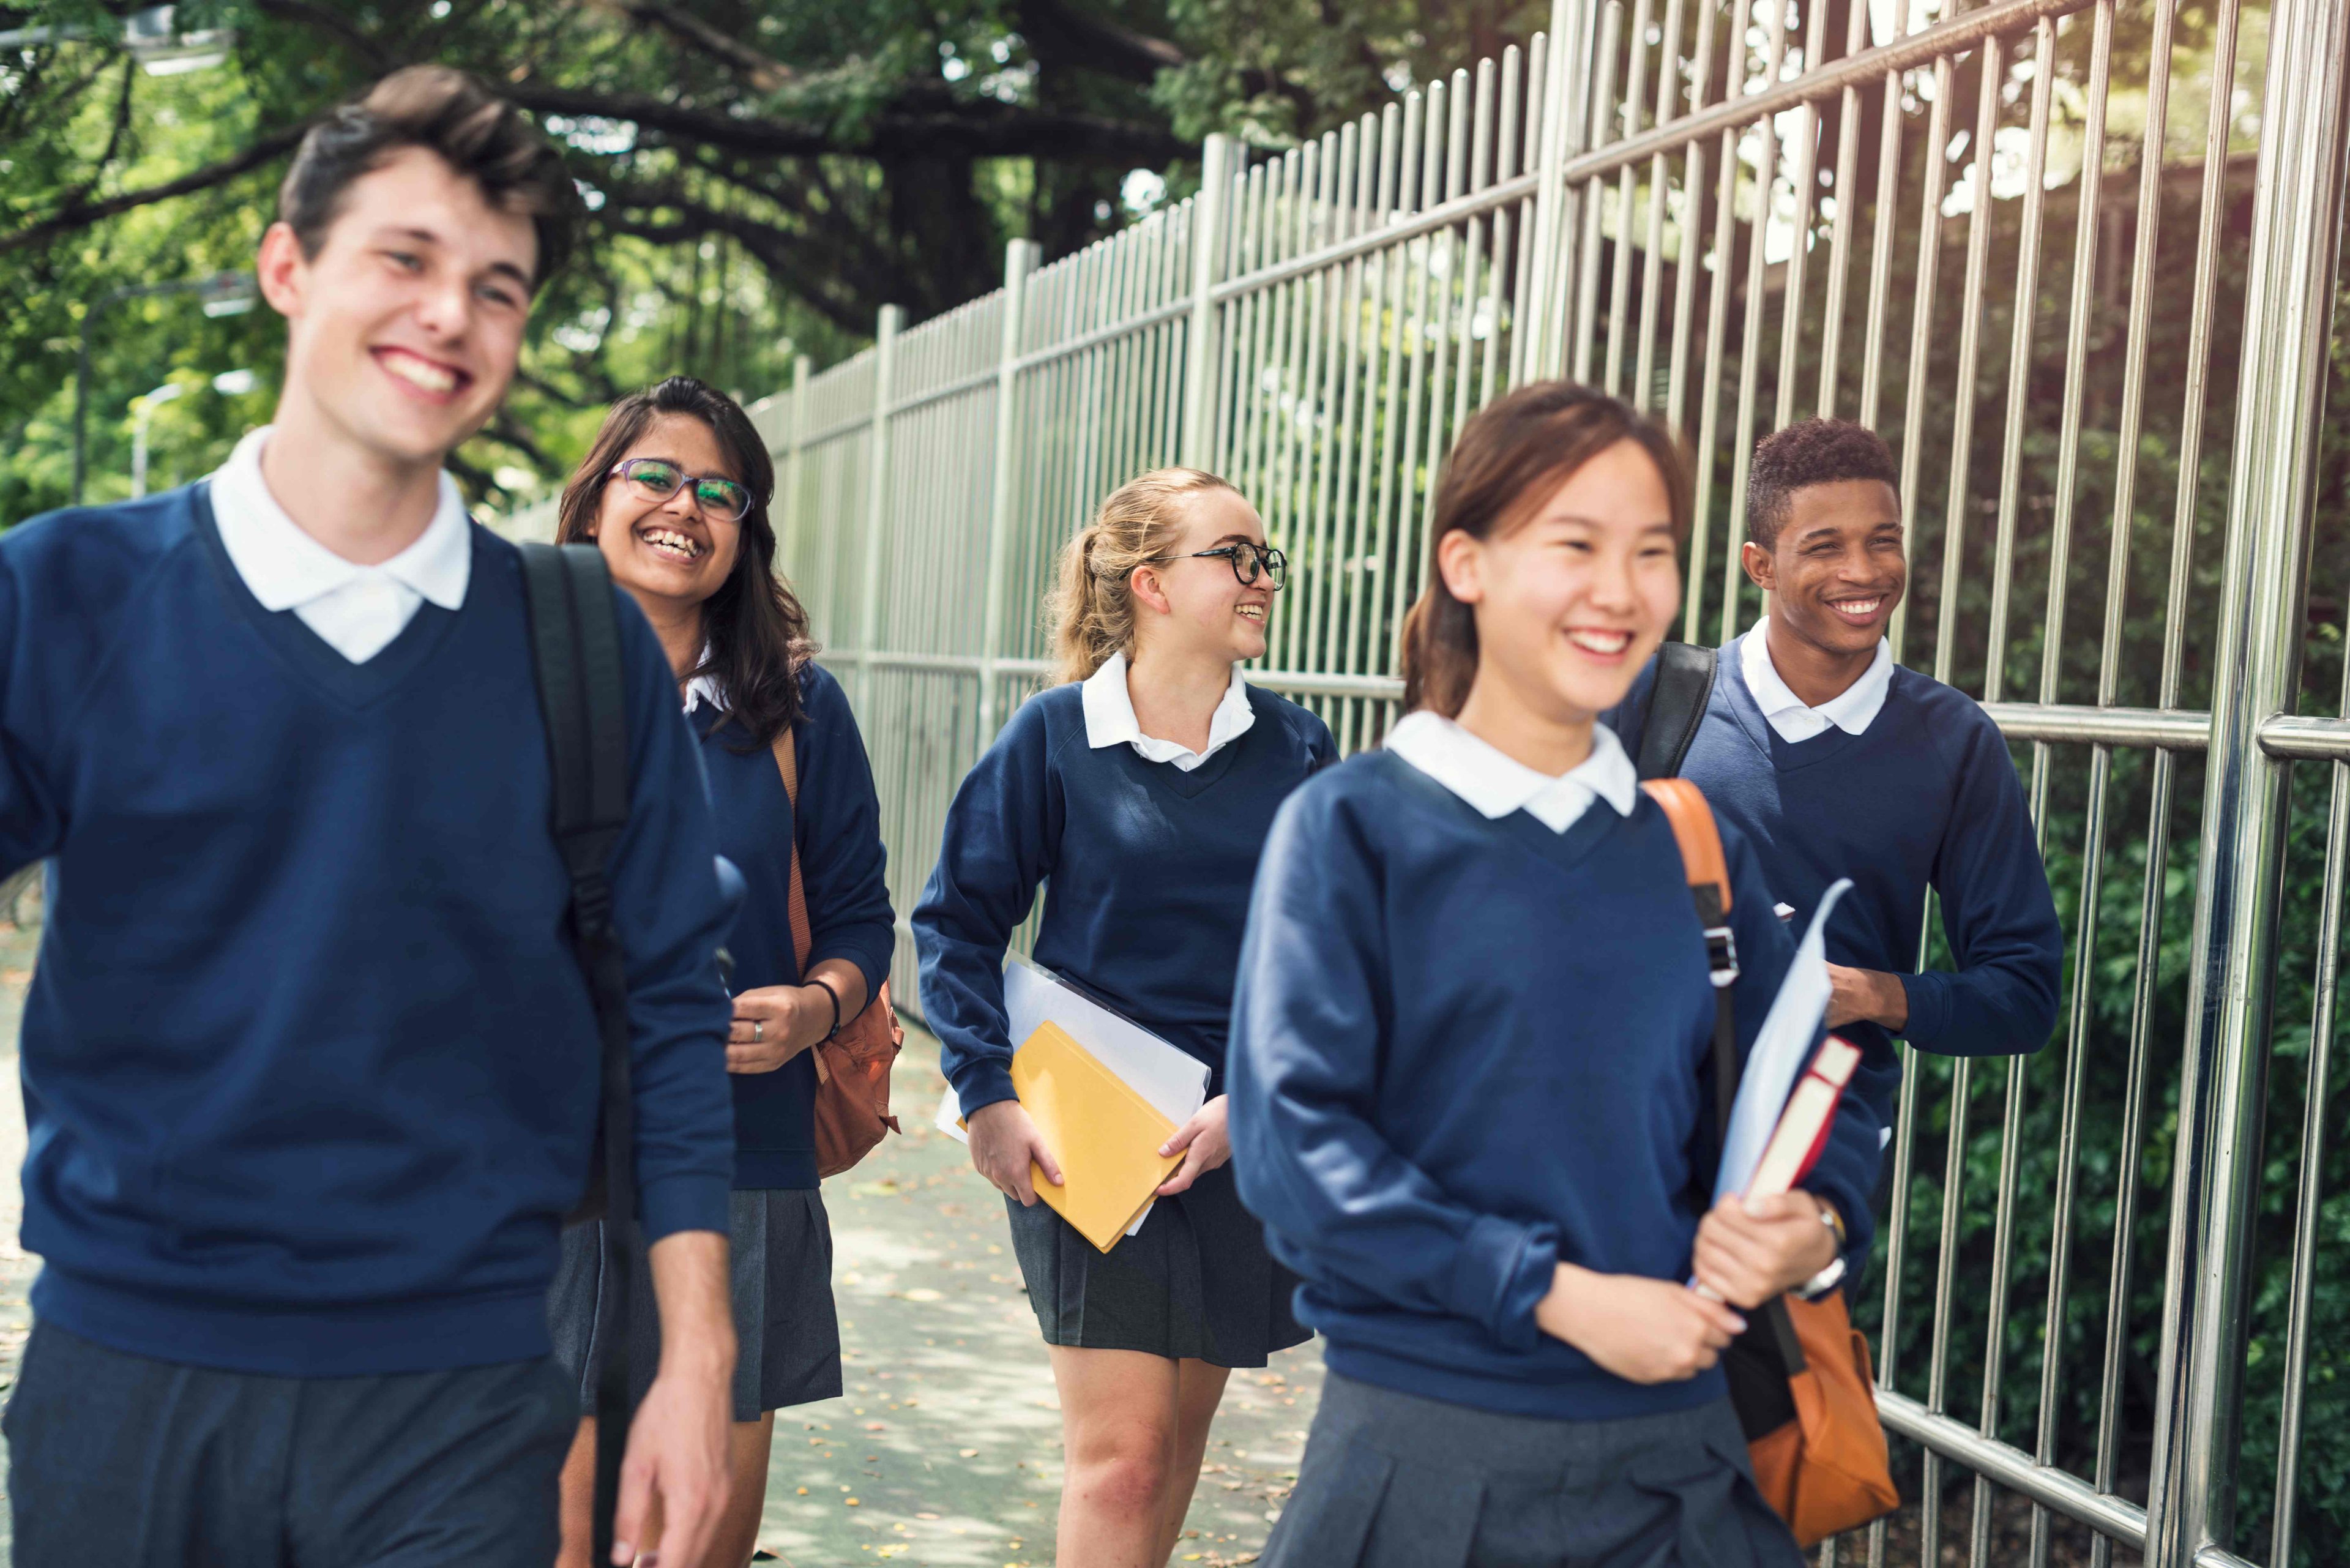 Group of teenagers in school uniform walking outdoors on a path, smiling and laughing